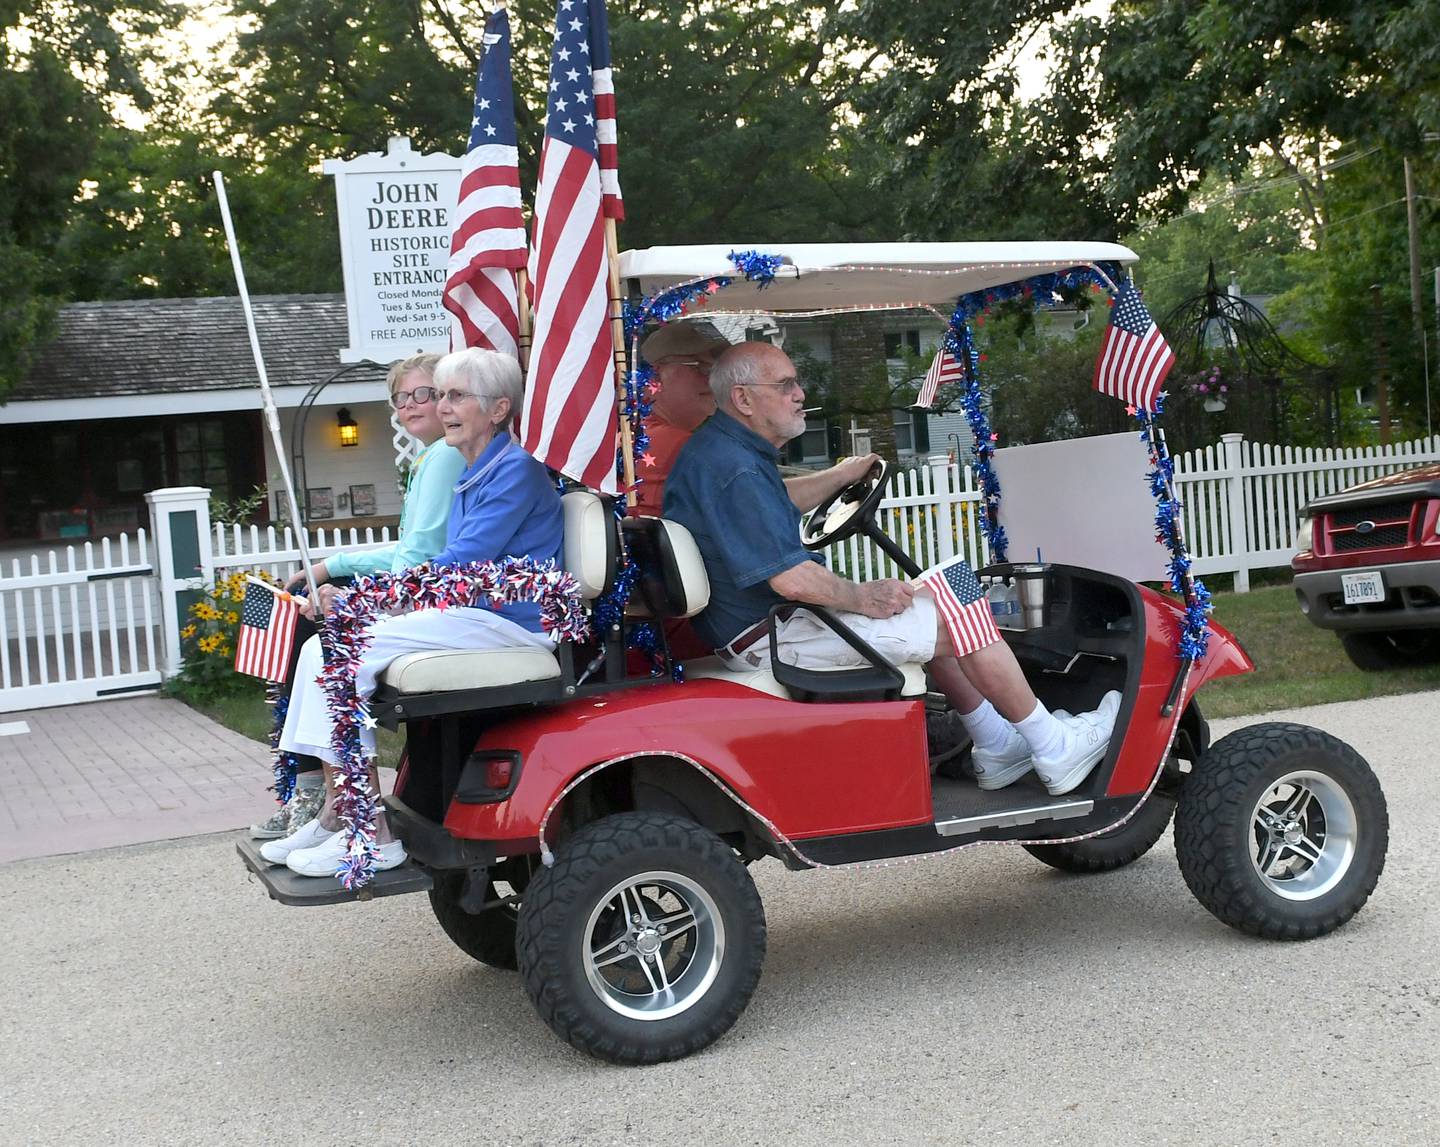 Roger and Joan Kelly, this year's Grand Marshals for the Grand Detour Golf Cart Parade, ride past the John Deere Historic Site at the start of the July 3 parade. The couple used to live in Grand Detour and were the owners of the Ace Hardware store in Dixon. Rich Kelly, a current owner of the store, was their driver.